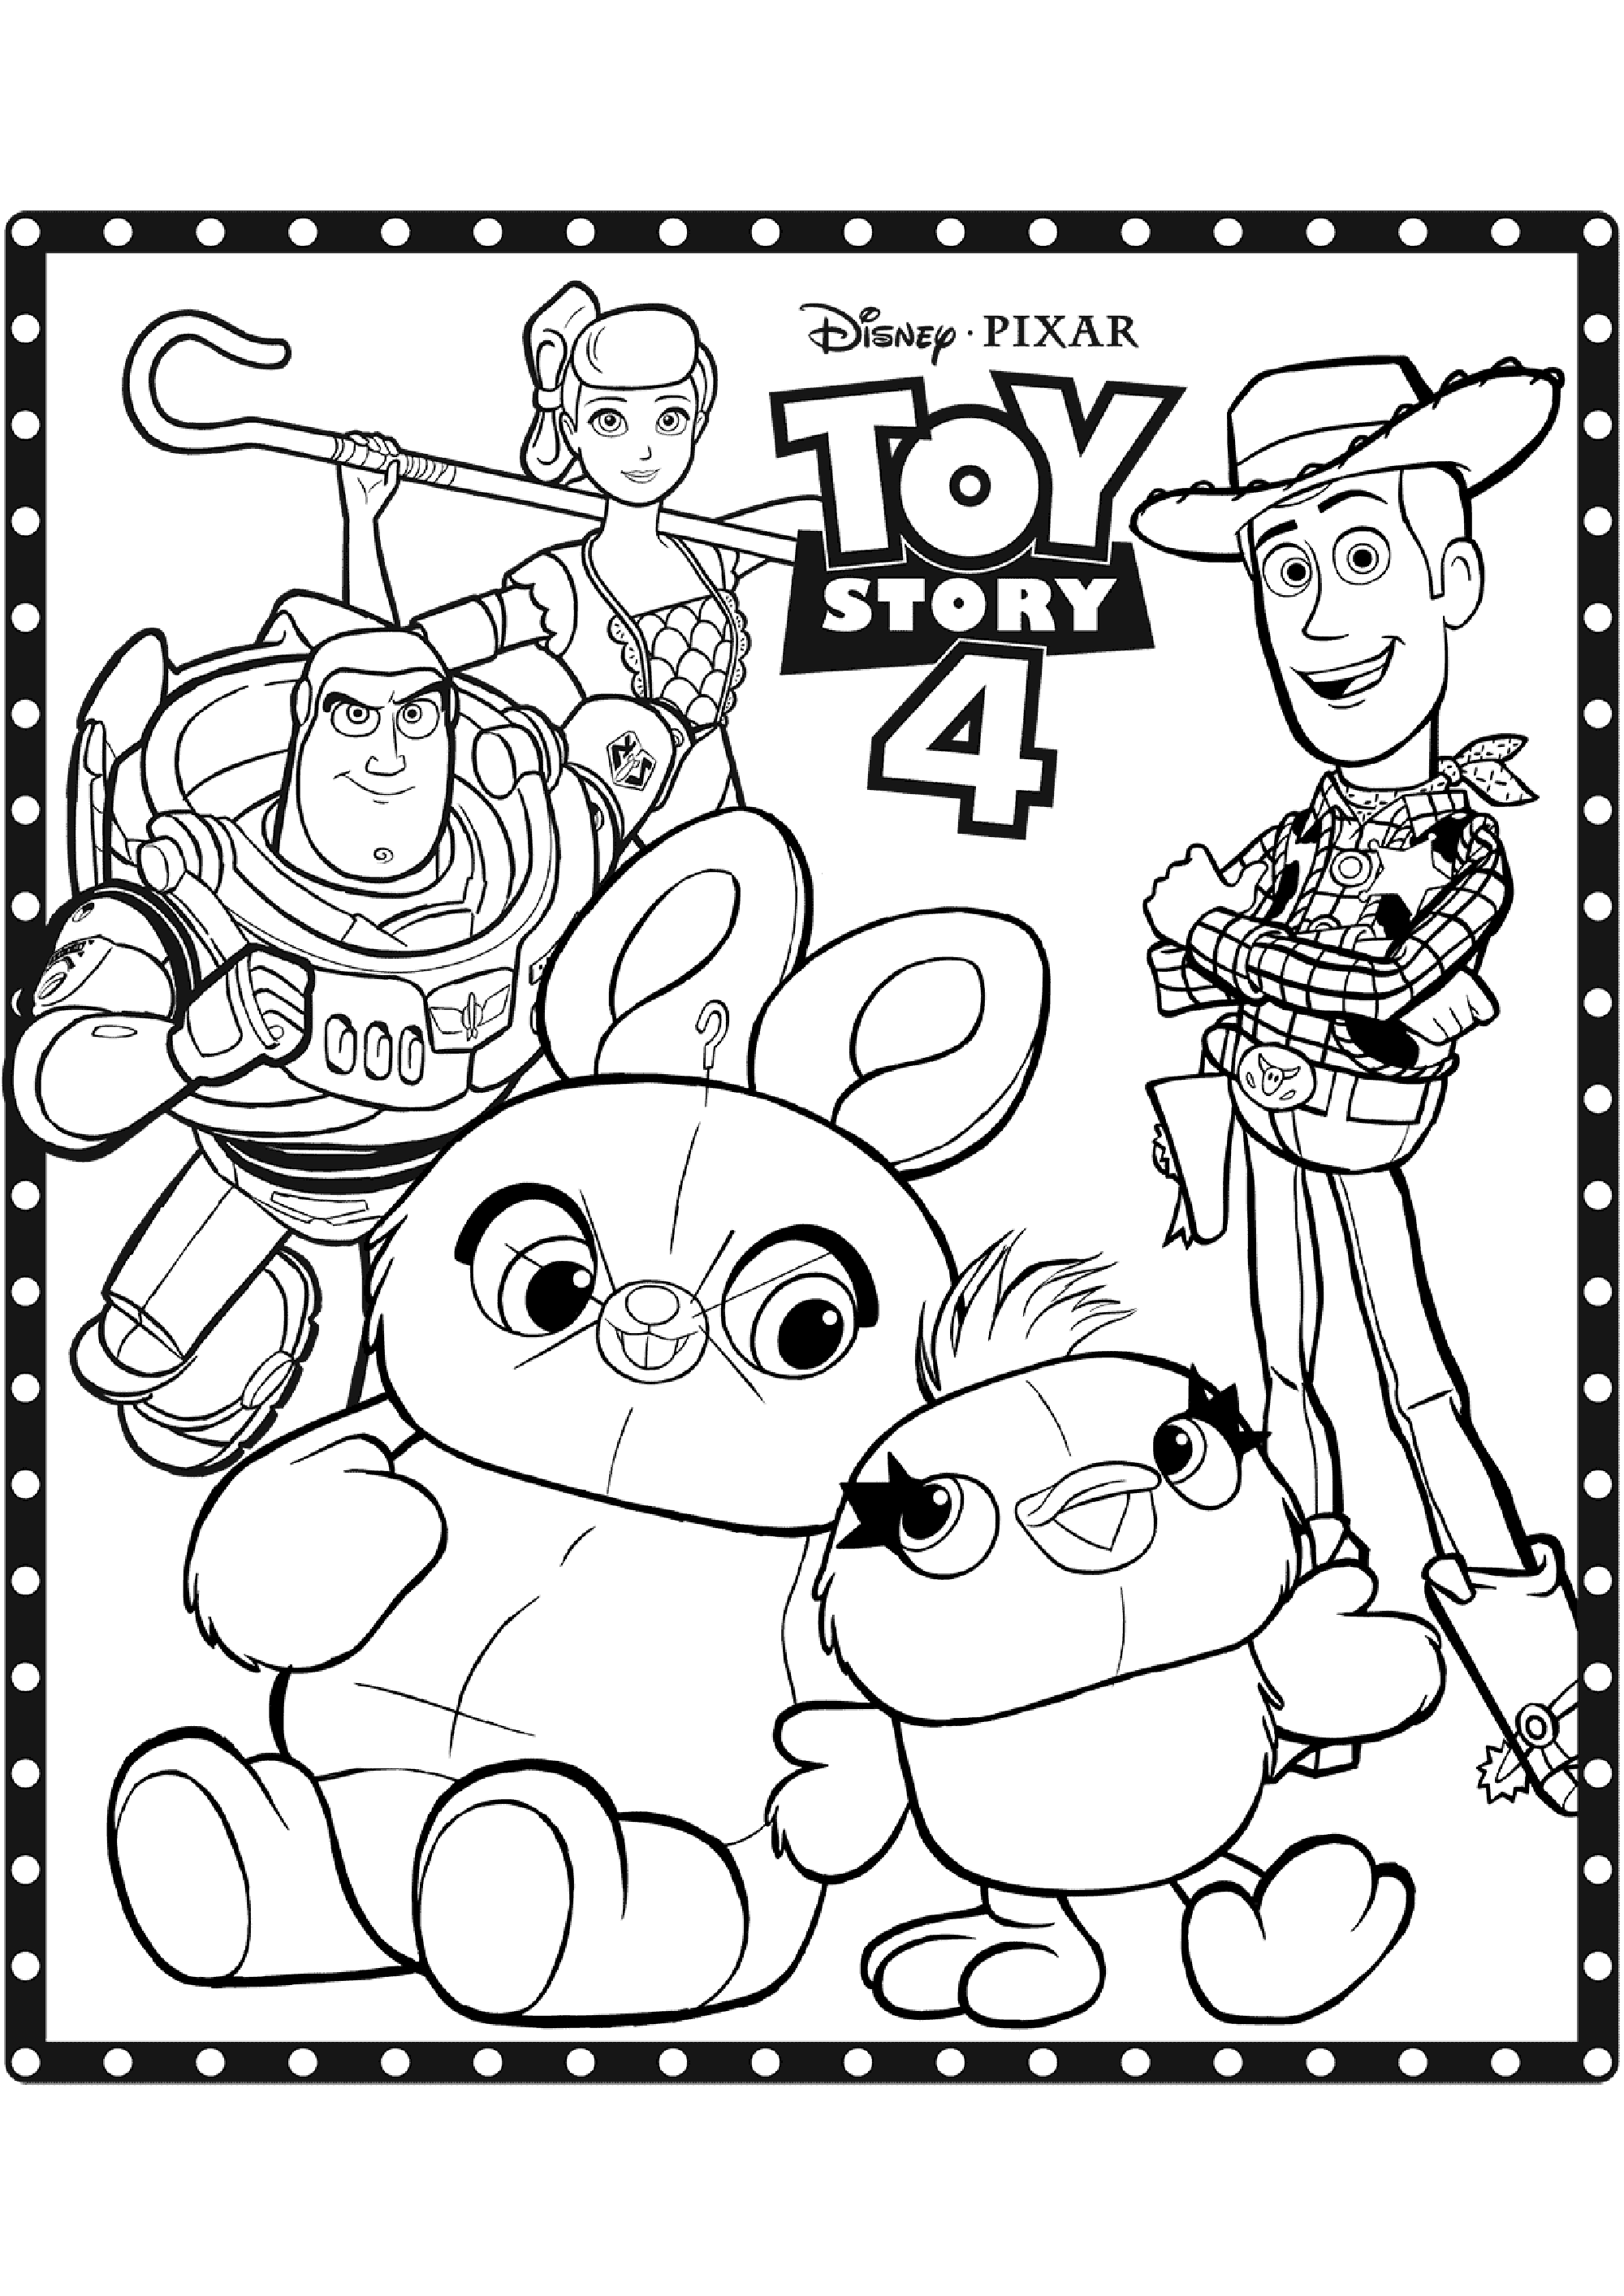 √ Coloring Pages For Kids Toy Story / Toy story coloring pages can be